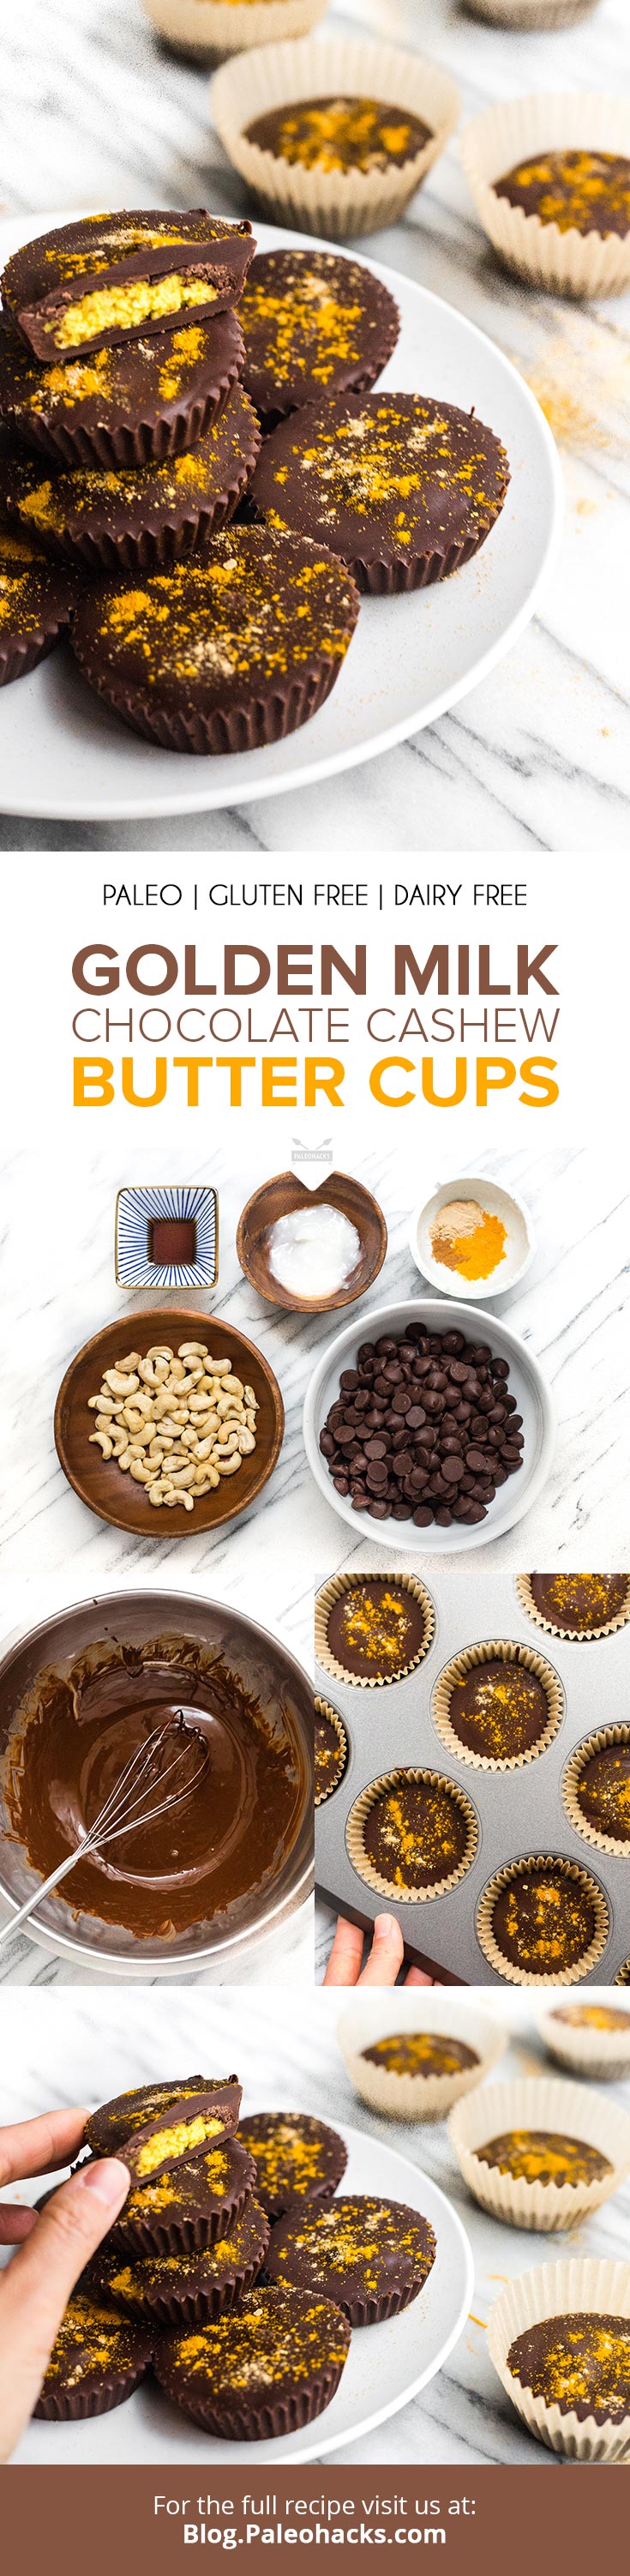 These homemade chocolate cups are just like REESE’S Peanut Butter cups, but a whole lot better. Dark chocolate and turmeric? Count us in!